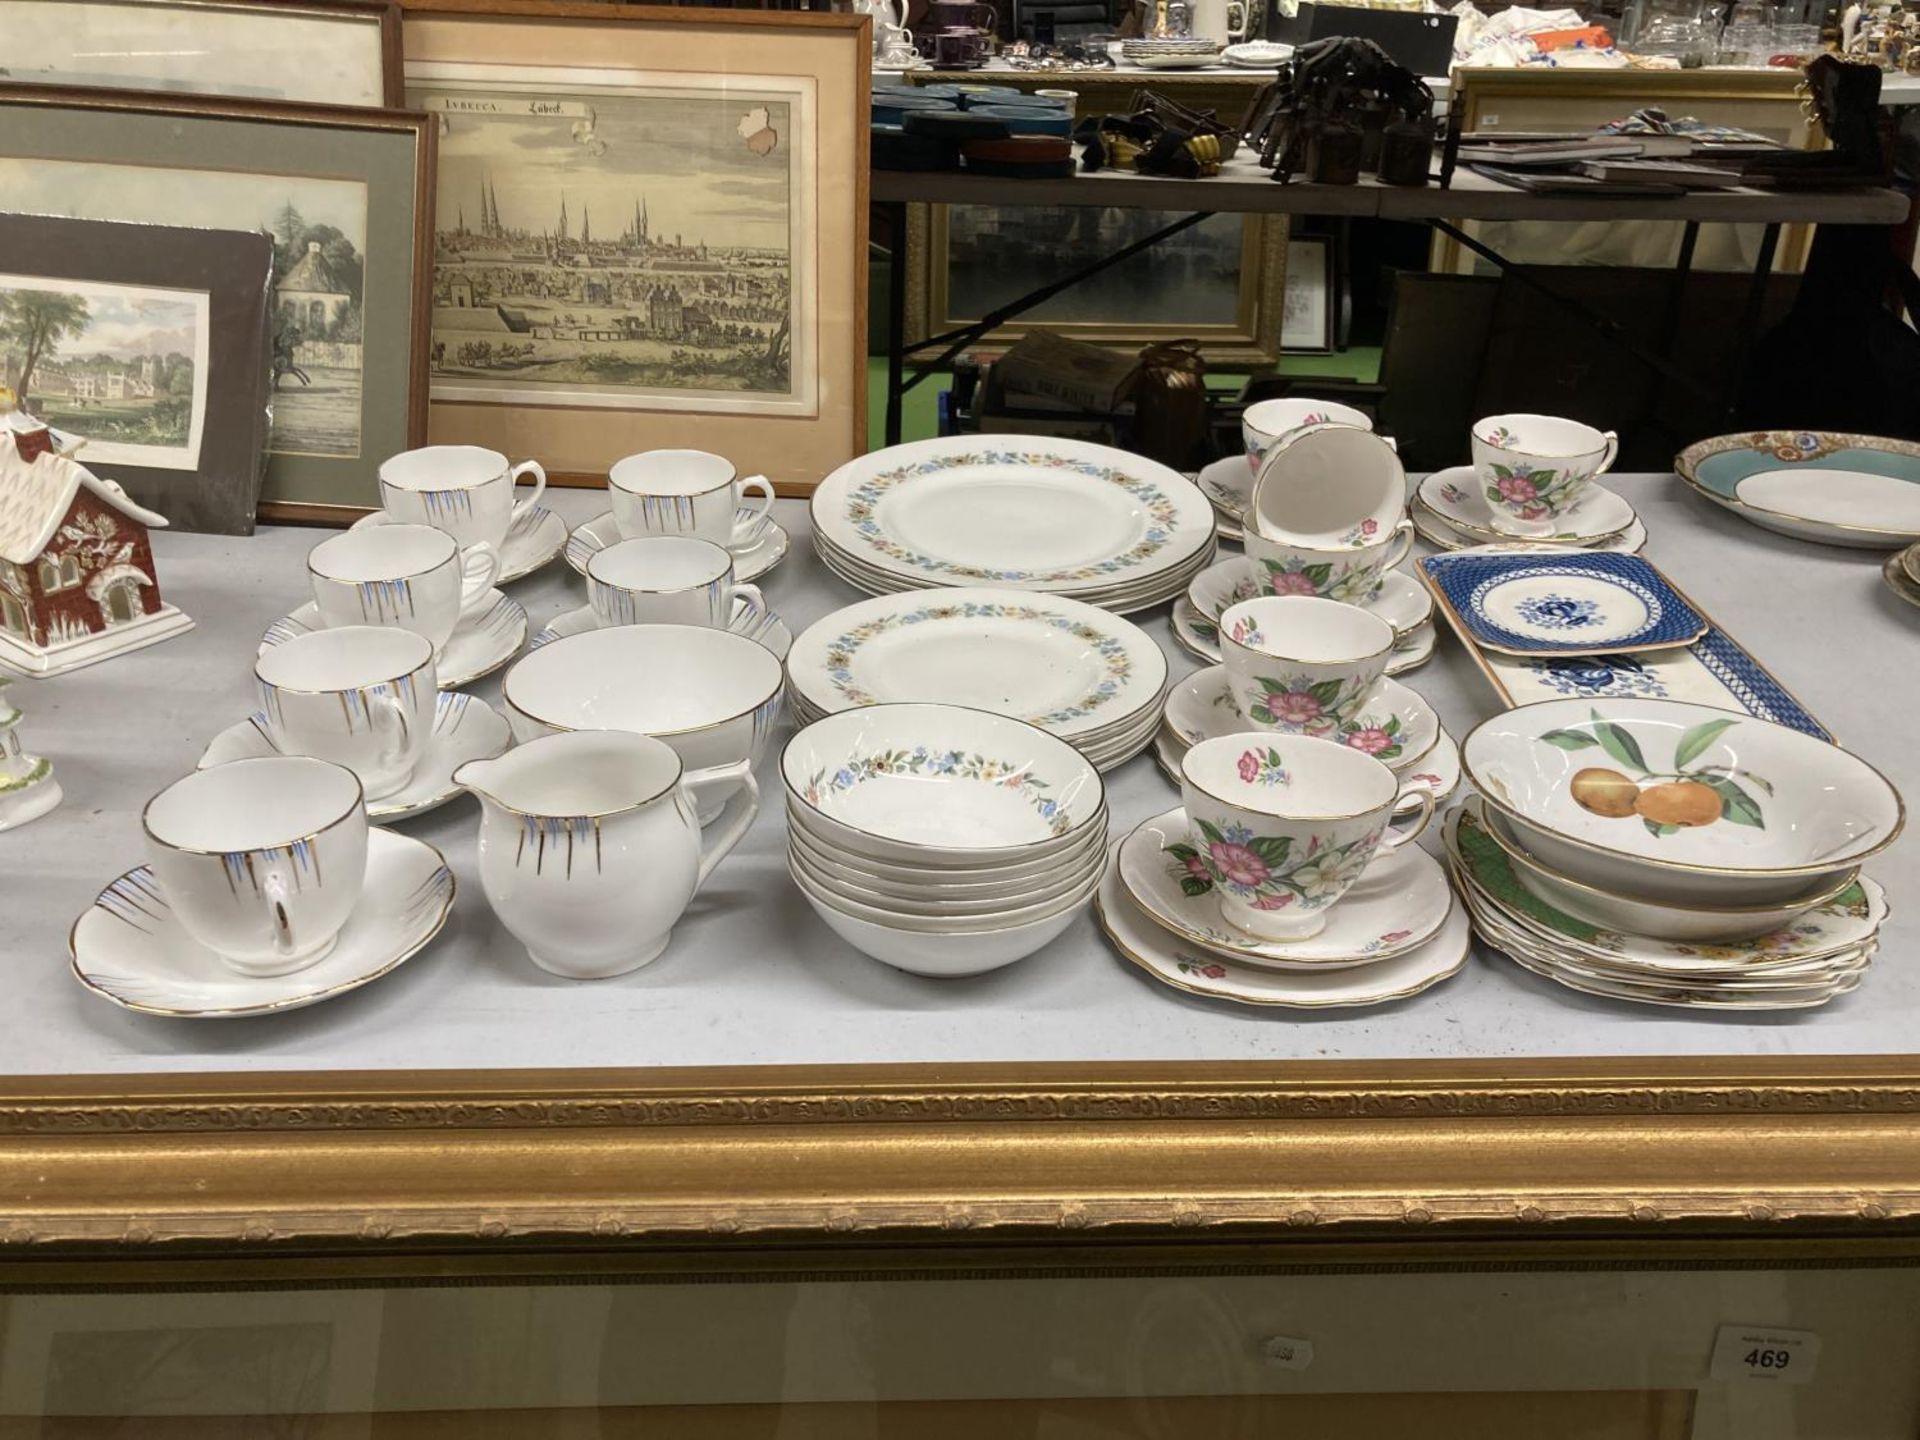 A QUANTITY OF CHINA TEACUPS, SAUCERS, PLATES, ETC TO INCLUDE ROYALE DOULTON 'PASTORALE', CROWN - Image 2 of 5